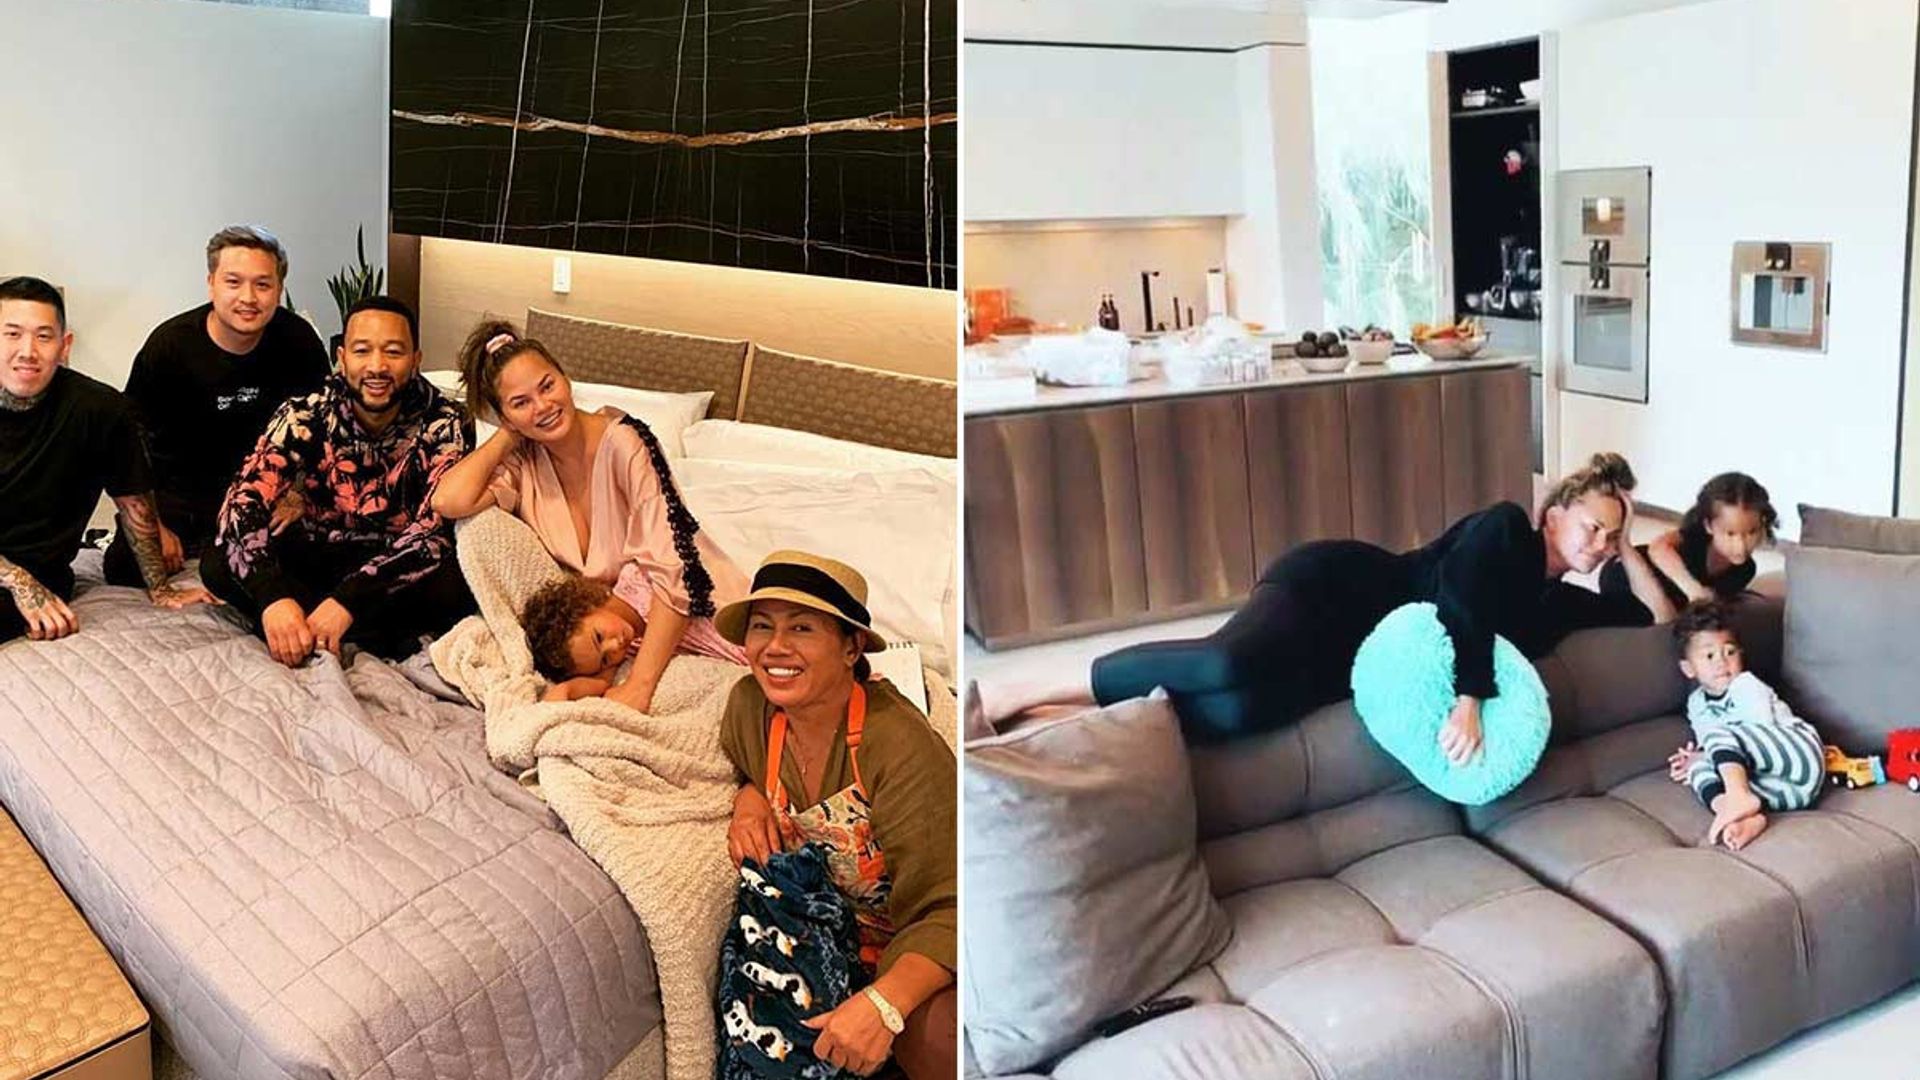 Chrissy Teigen and John Legend's rental home has to be seen to be believed